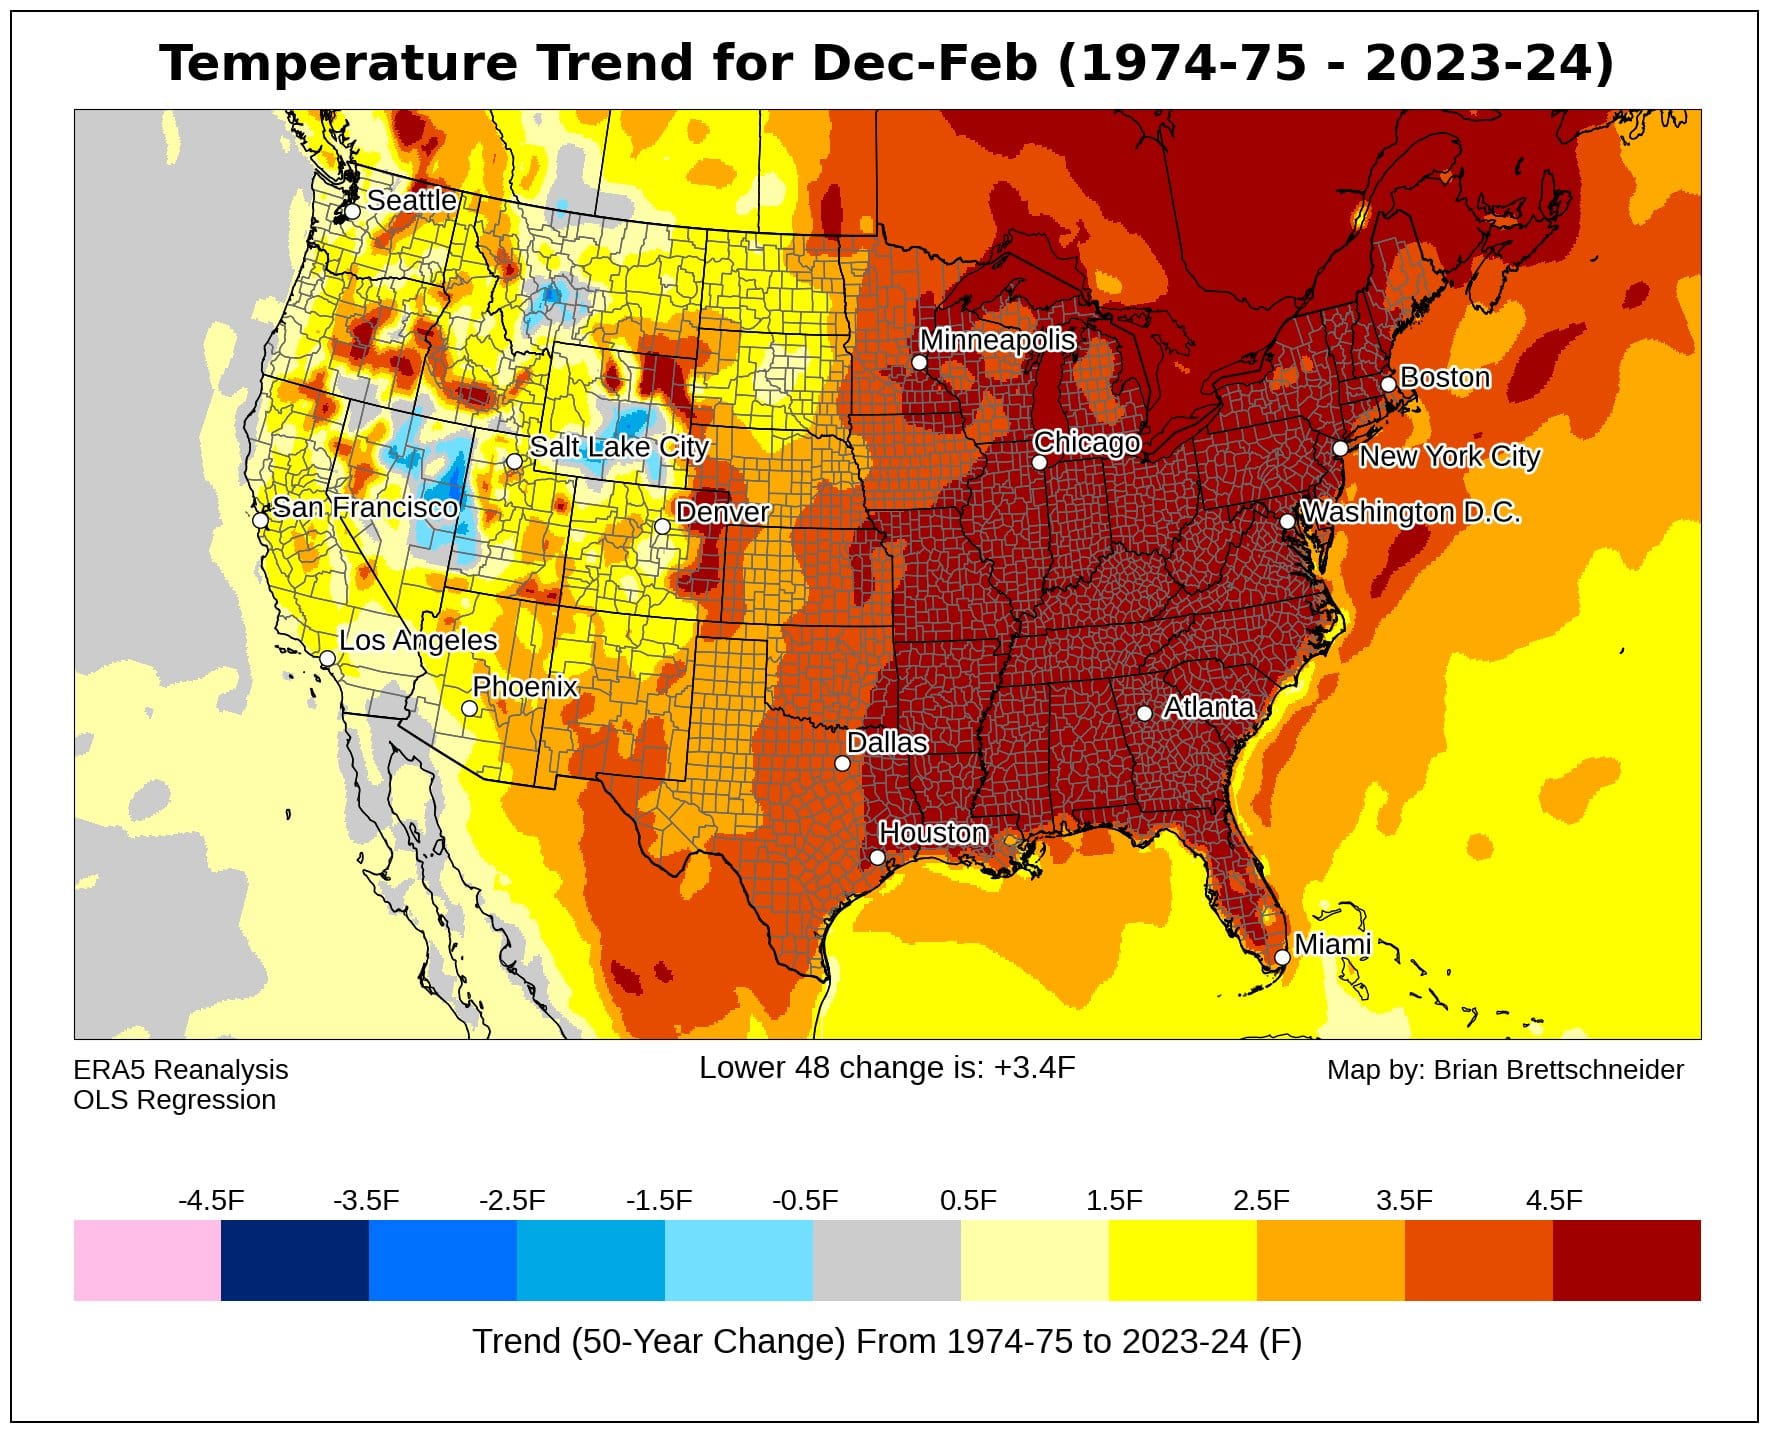 50 year temperature trend for winter provided by Brian Brettschneider.